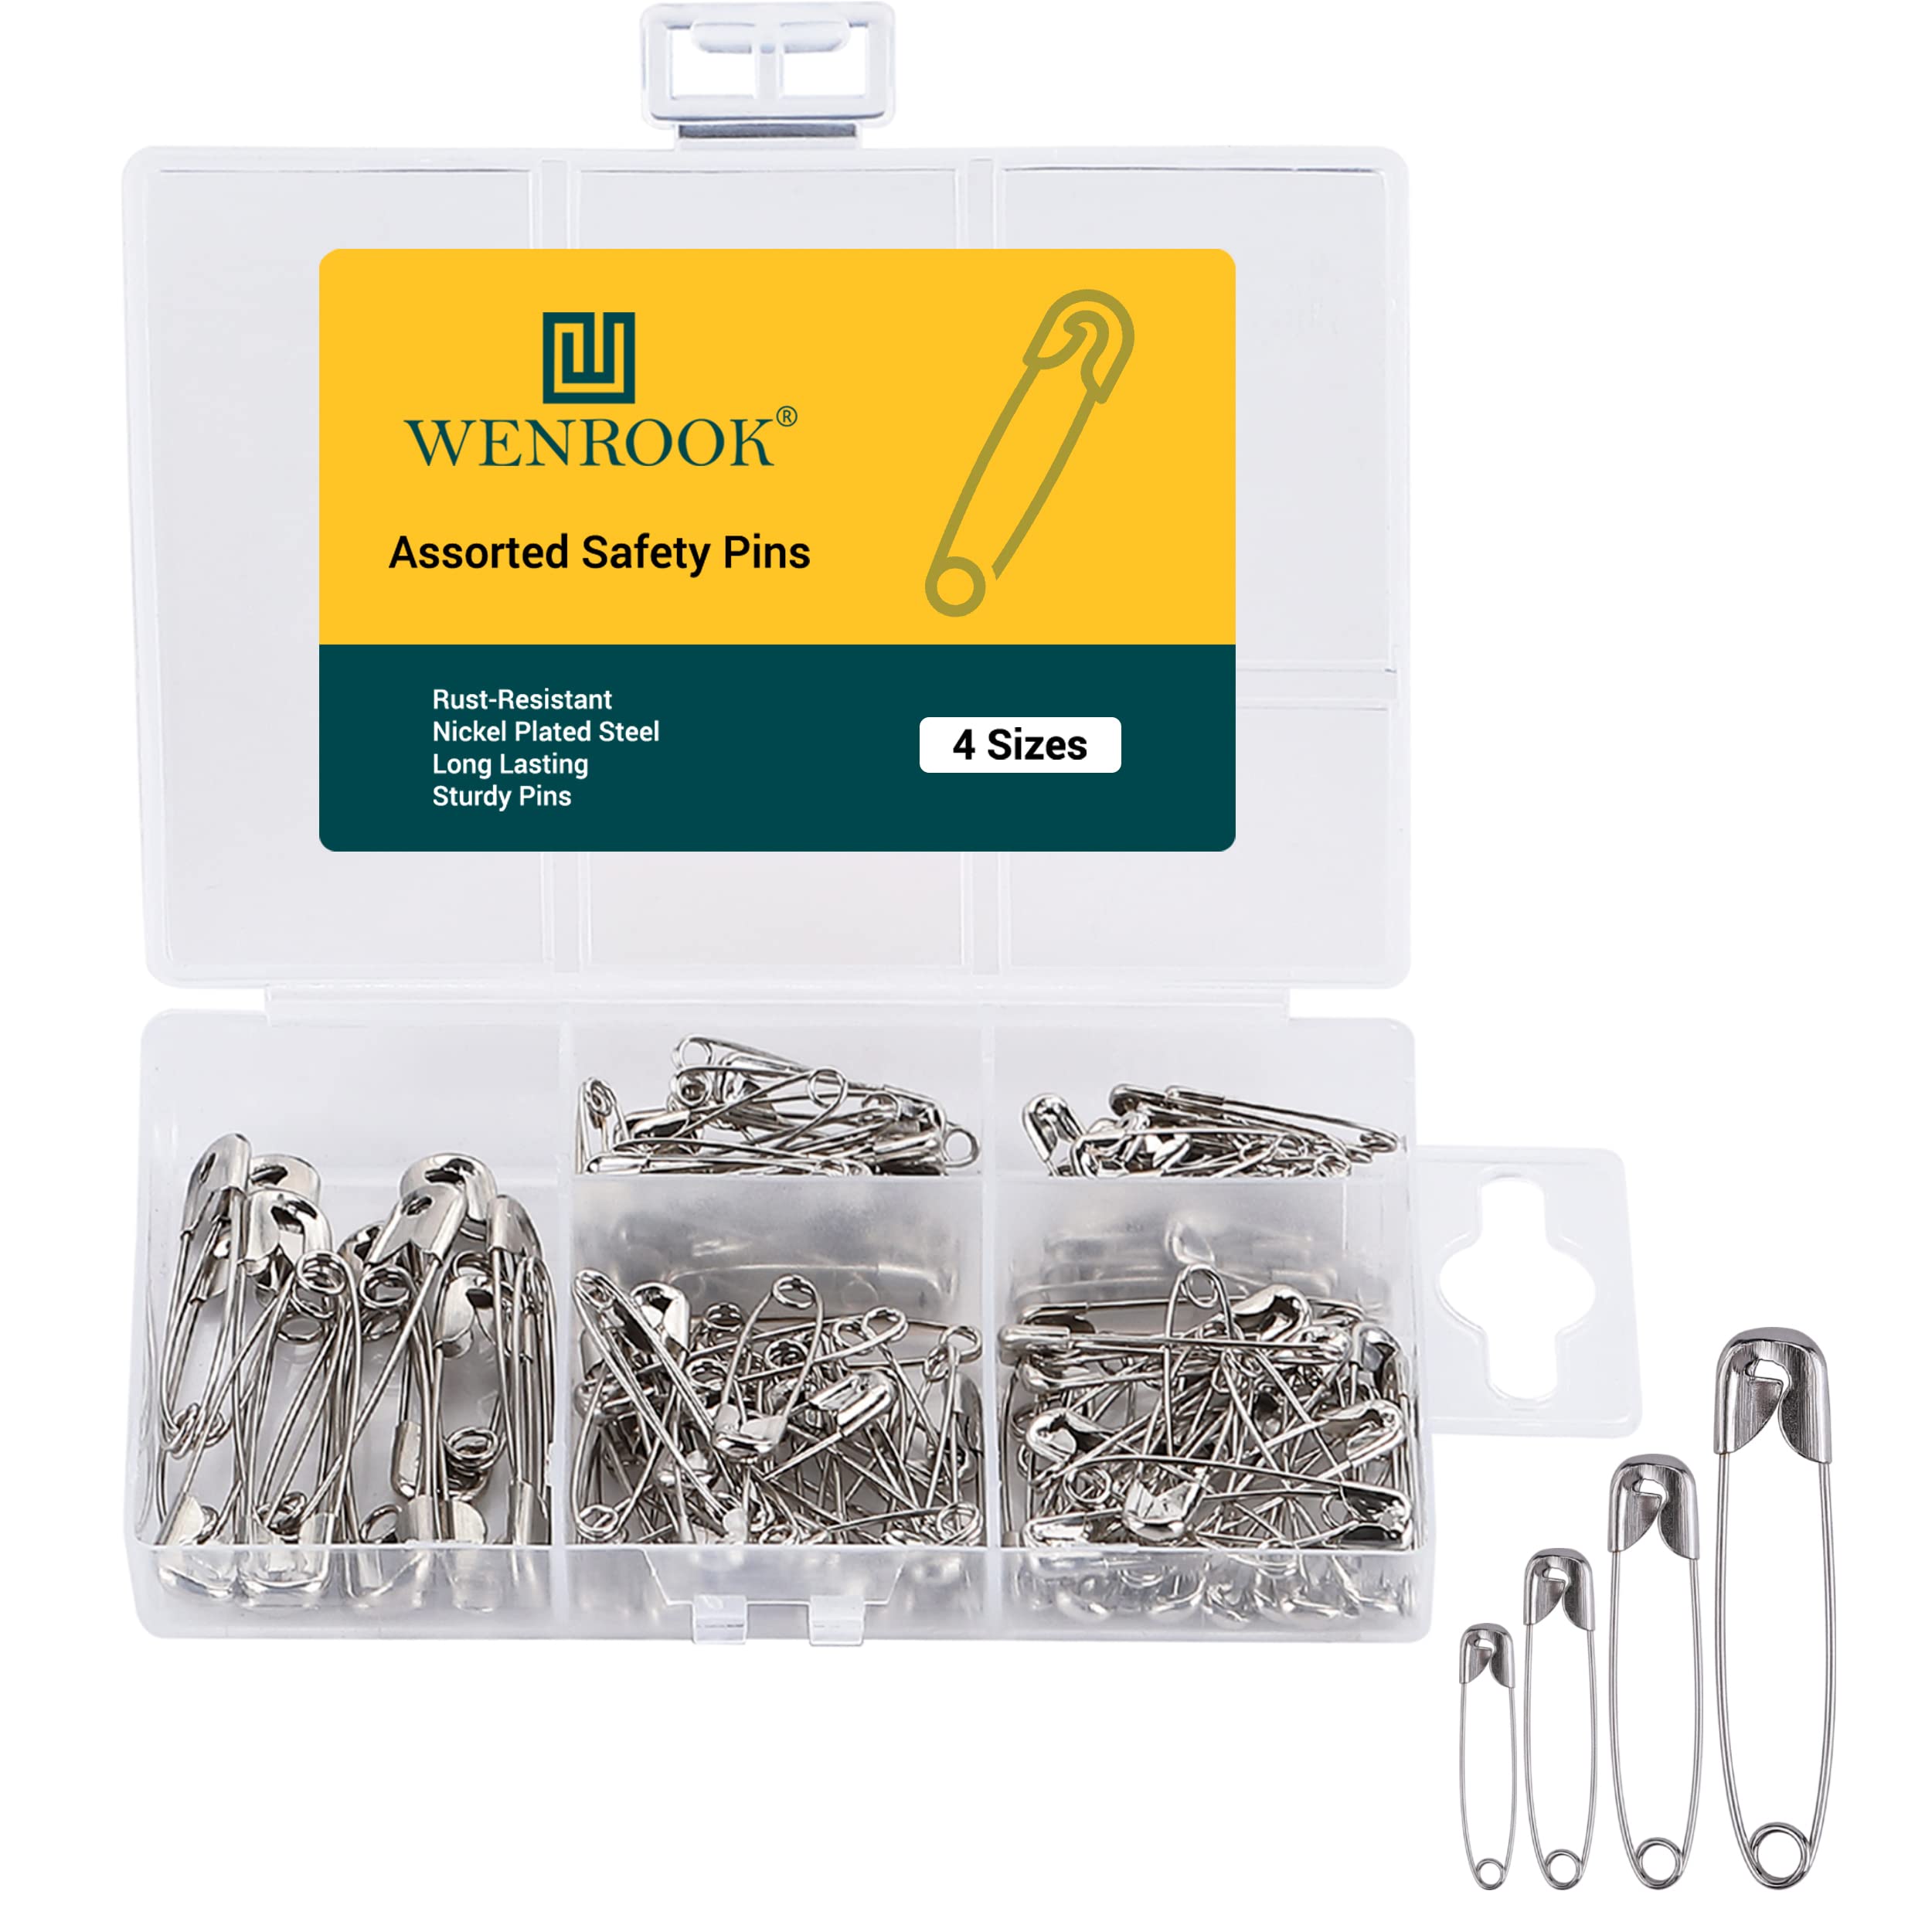 Wenrook Safety Pins Assorted 4-Size Pack of 150 - Strong Nickel